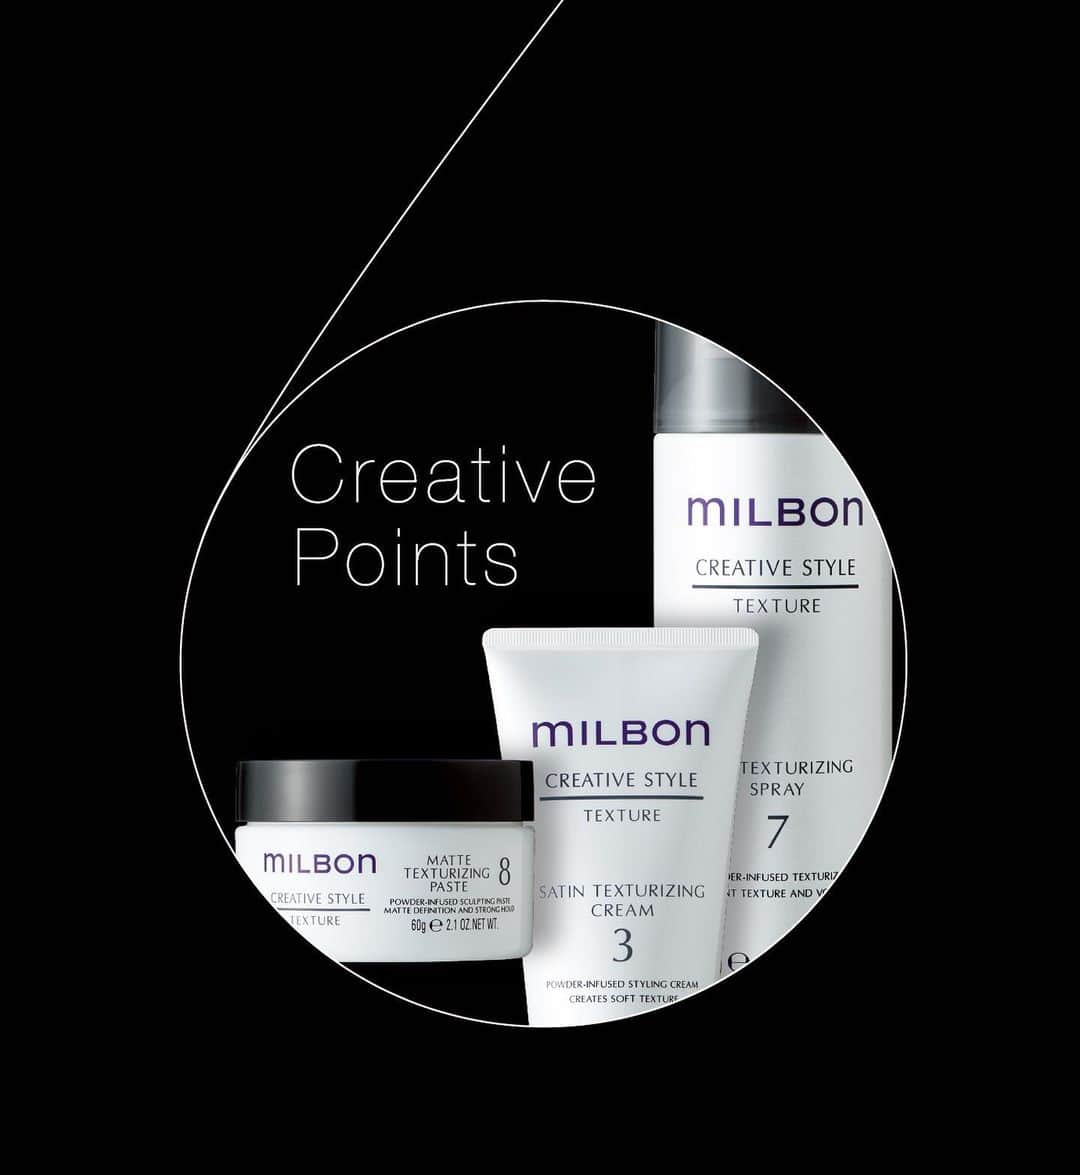 "milbon"（ミルボン）のインスタグラム：「New items in the “milbon” CREATIVE STYLE series was launched in Japan in March！ Three new products that expand the range of texture expression.  They are very light and can keep texture even in high humidity.  Your hairstyle becomes fashionable. ◆Cream type= "SATIN TEXTURIZING CREAM3". ◆Spray type ="DRY TEXTURIZING SPRAY7". ◆Paste type ="MATTE TEXTURIZING PASTE8". “milbon”のスタイリング剤に新アイテムが日本で3月に新発売！ 新質感セミマットの表現が特長の3品。 使い心地・つけ心地がすごく軽いのに、高湿度でもセミマットな質感が1日続く。いつものヘアスタイルが一瞬でオシャレな表情に。 ◆クリームタイプの「SATIN TEXTURIZING CREAM3」 ◆スプレータイプの「DRY TEXTURIZING SPRAY7」 ◆ペーストタイプの「MATTE TEXTURIZING PASTE8」  #styling #hairstyle #milbon #globalmilbon #newproduct #haircare #finishwork #cream #spray #paste #monochrome #monotone #hairmake #ミルボン #グローバルミルボン #スタイリング剤 #ヘアメイク #セミマット #セミマットヘア #ヘアケア #モノクロ #モノトーン #白黒」